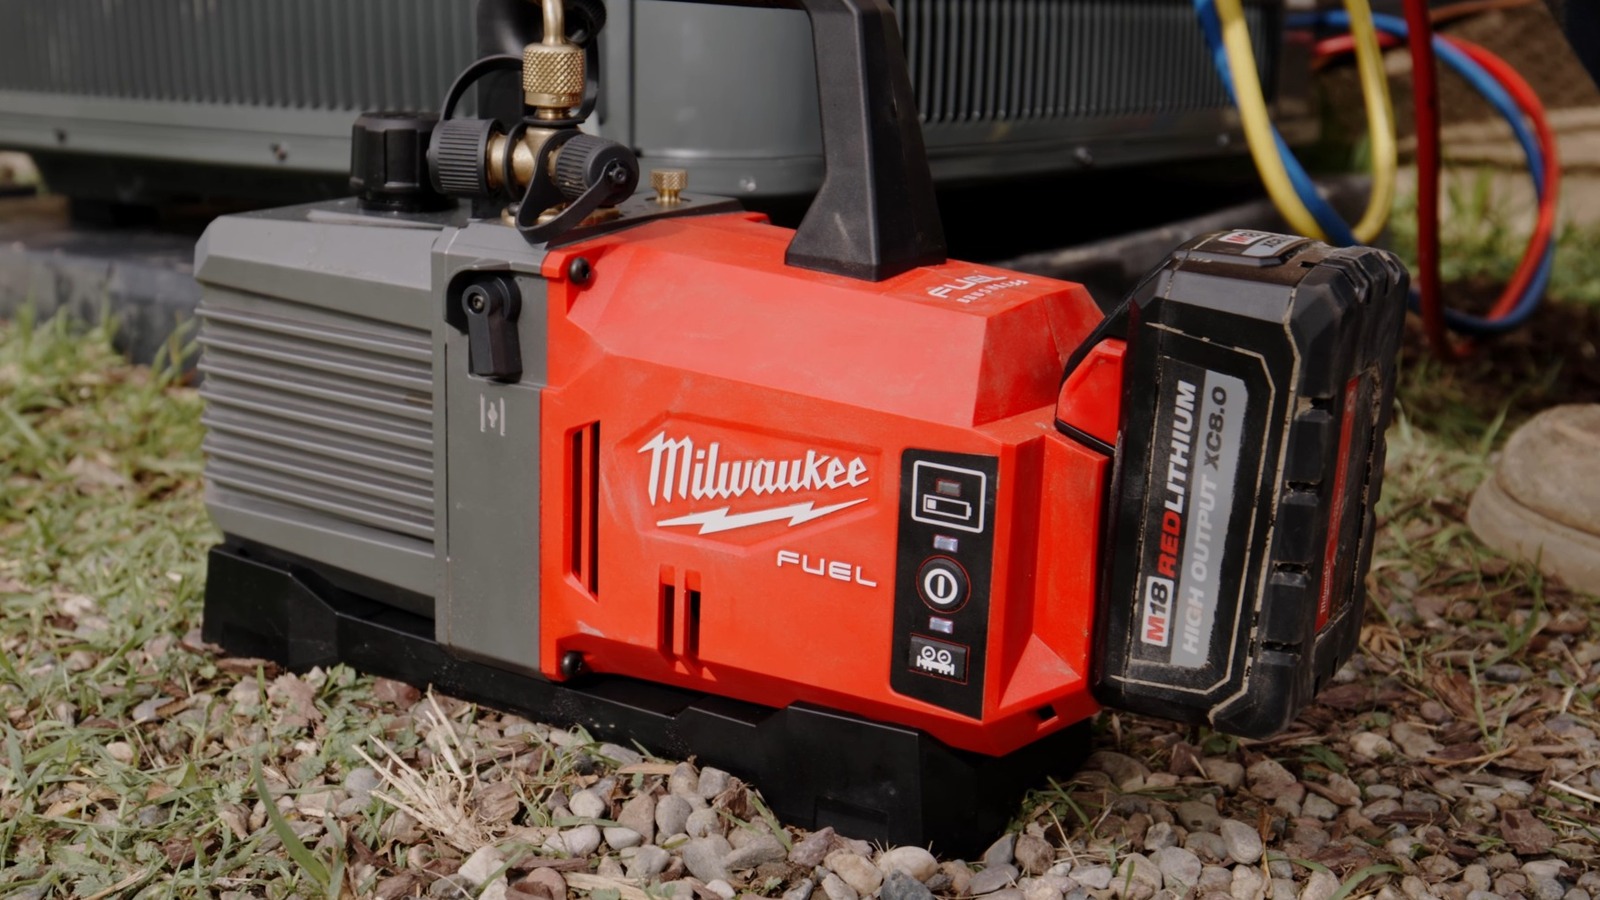 The Best Milwaukee Power Tools If You’re Doing Plumbing Work